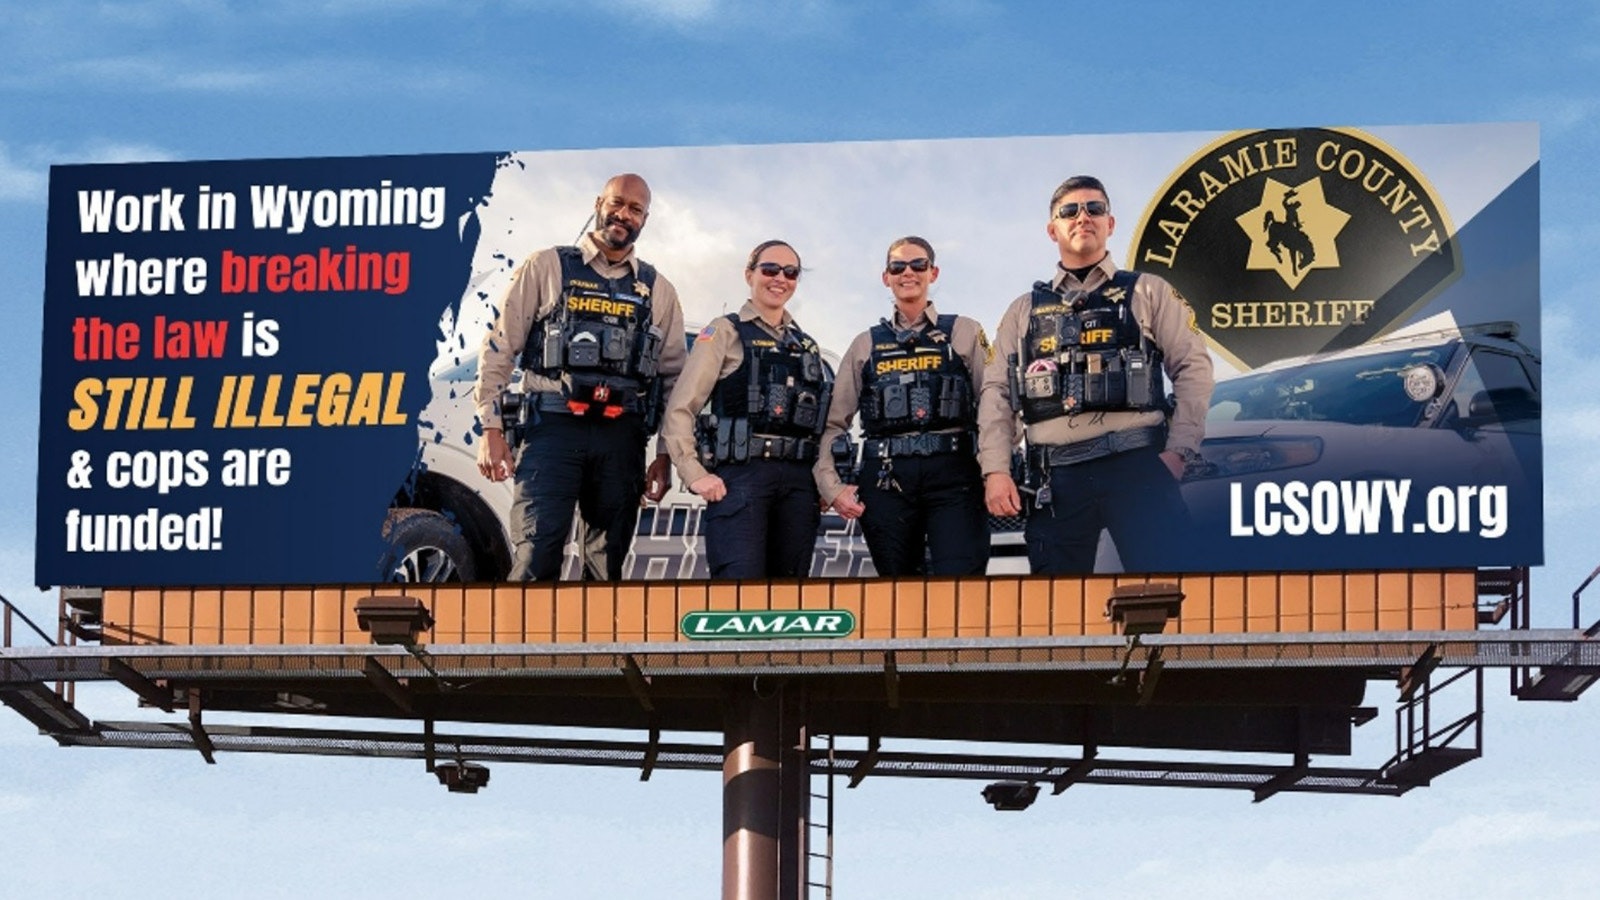 This billboard commissioned by the Laramie County Sheriff's Office is an appeal to recruit any Denver police officers who may feel "frustrated" with their jobs there, LCSO Sheriff Brian Kozak said.